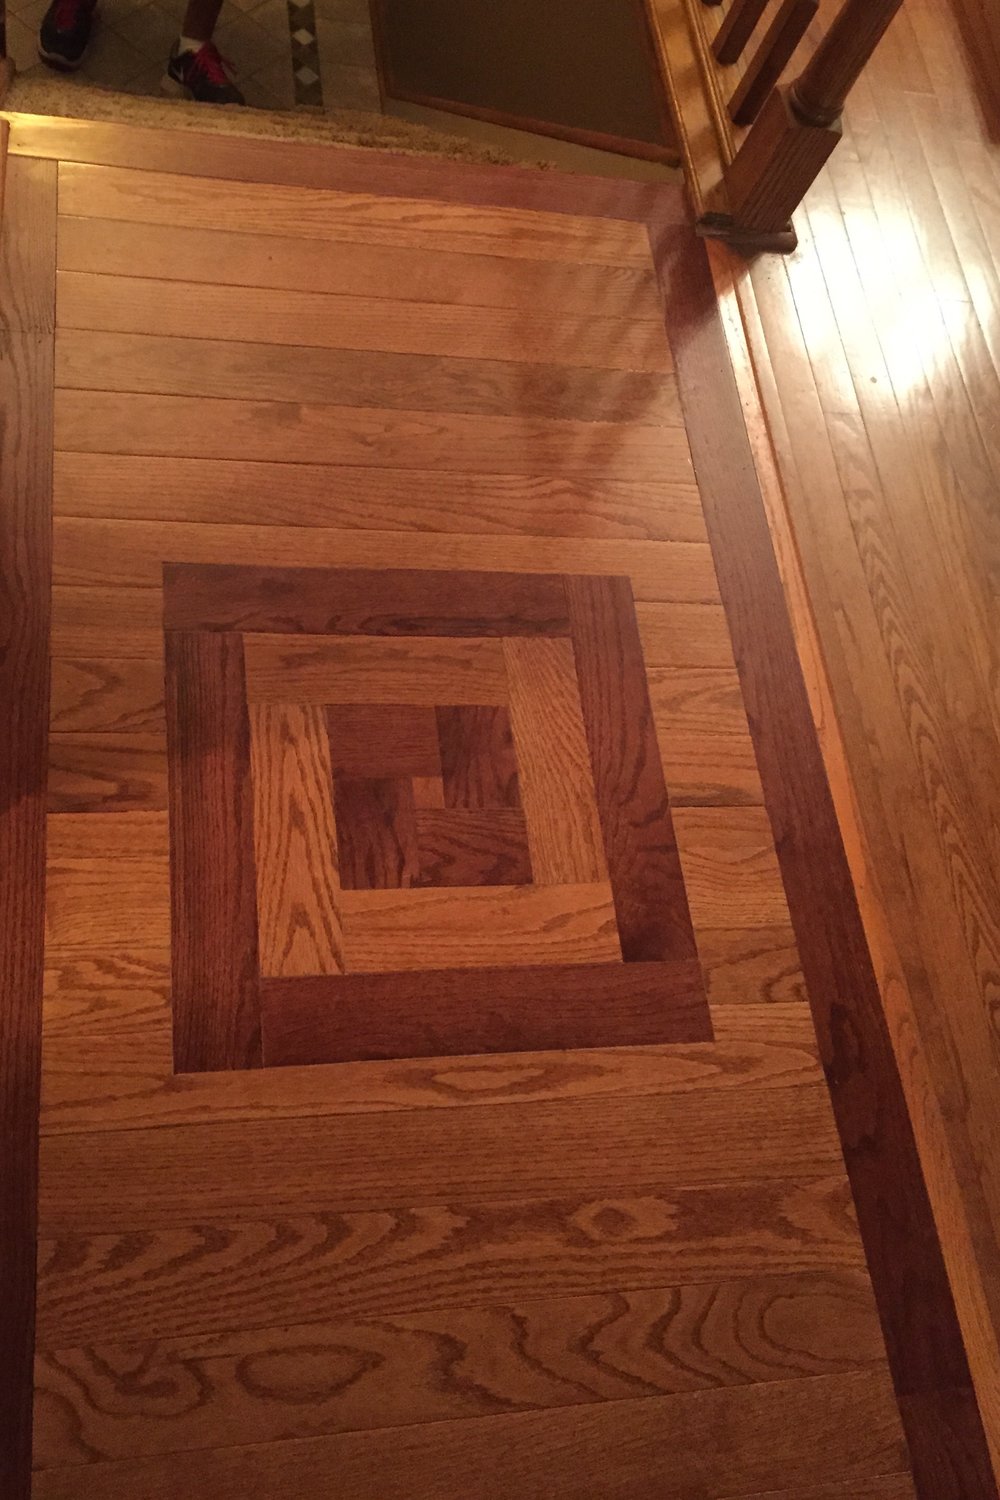 About Transition Flooring Concepts, Hardwood Floor Transition Pieces